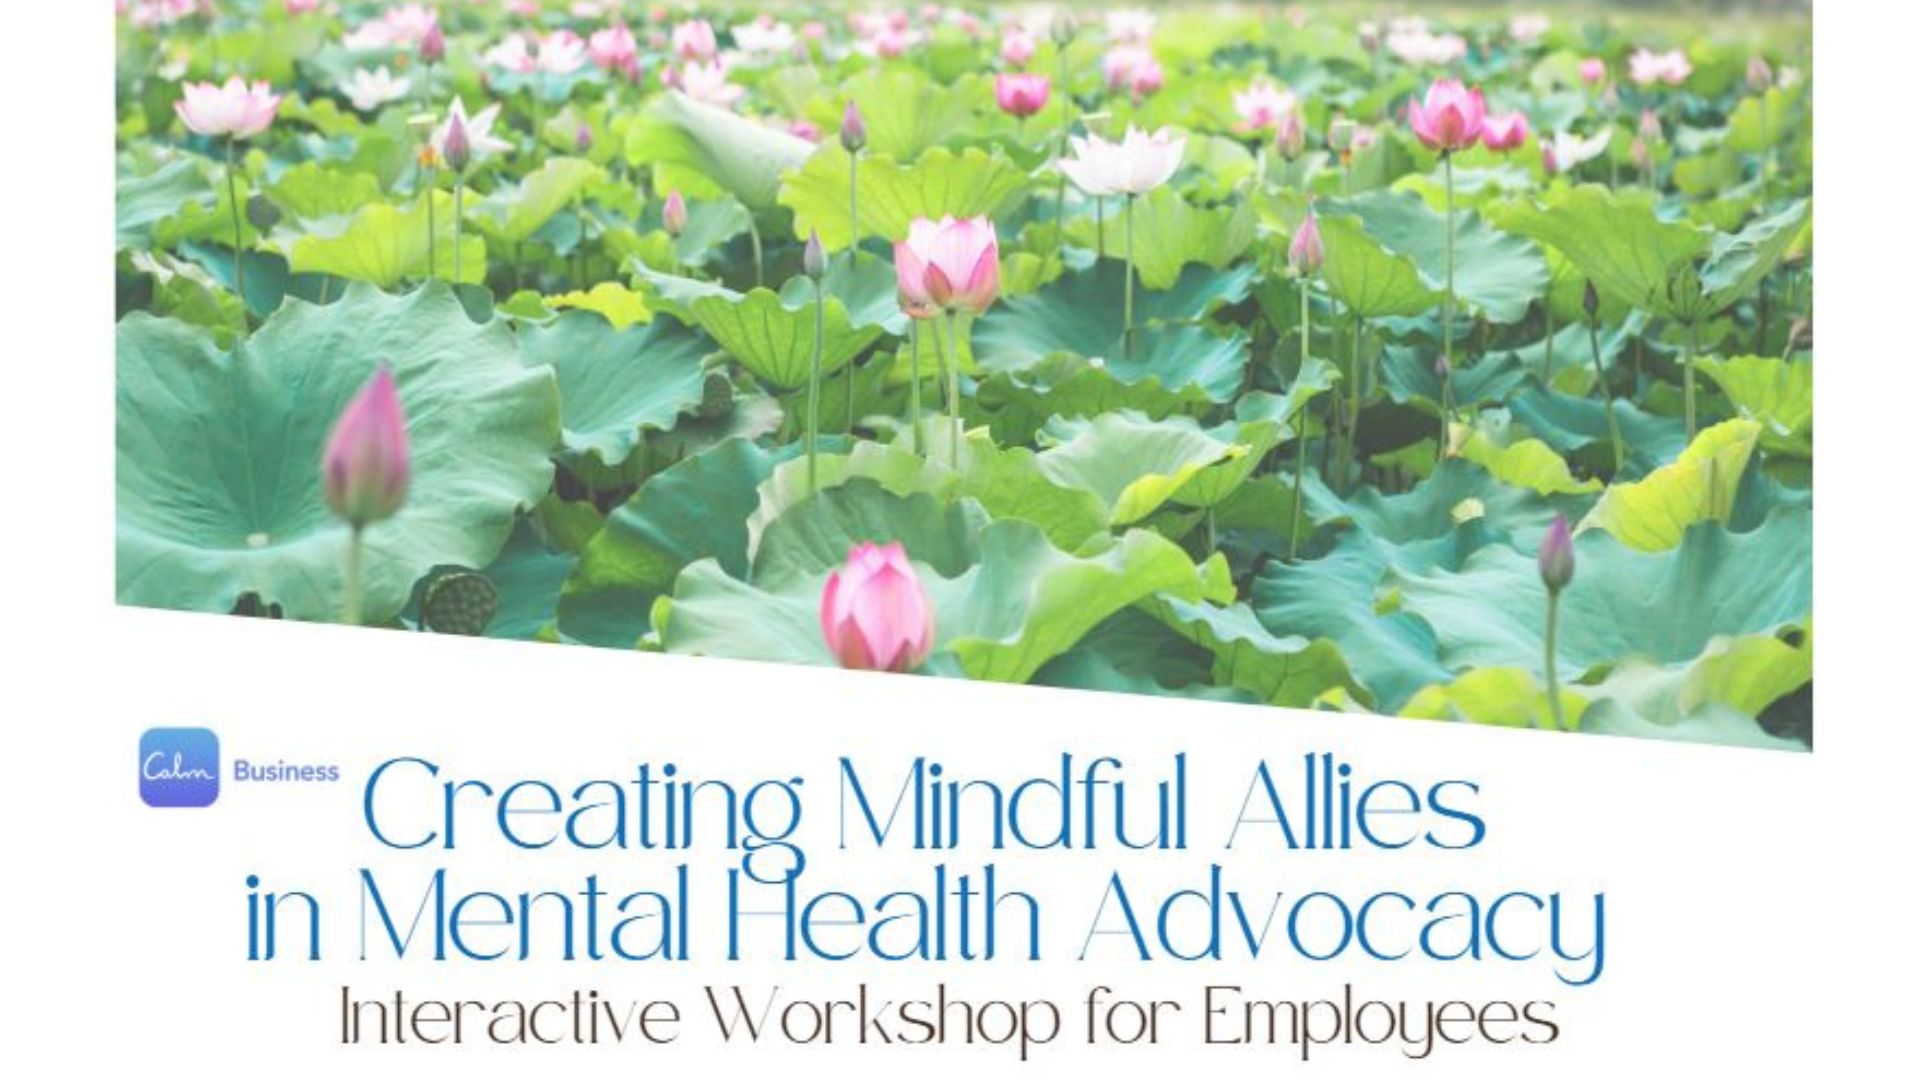 Connect with EASE- Creating Mindful Allies in Mental Health Advocacy